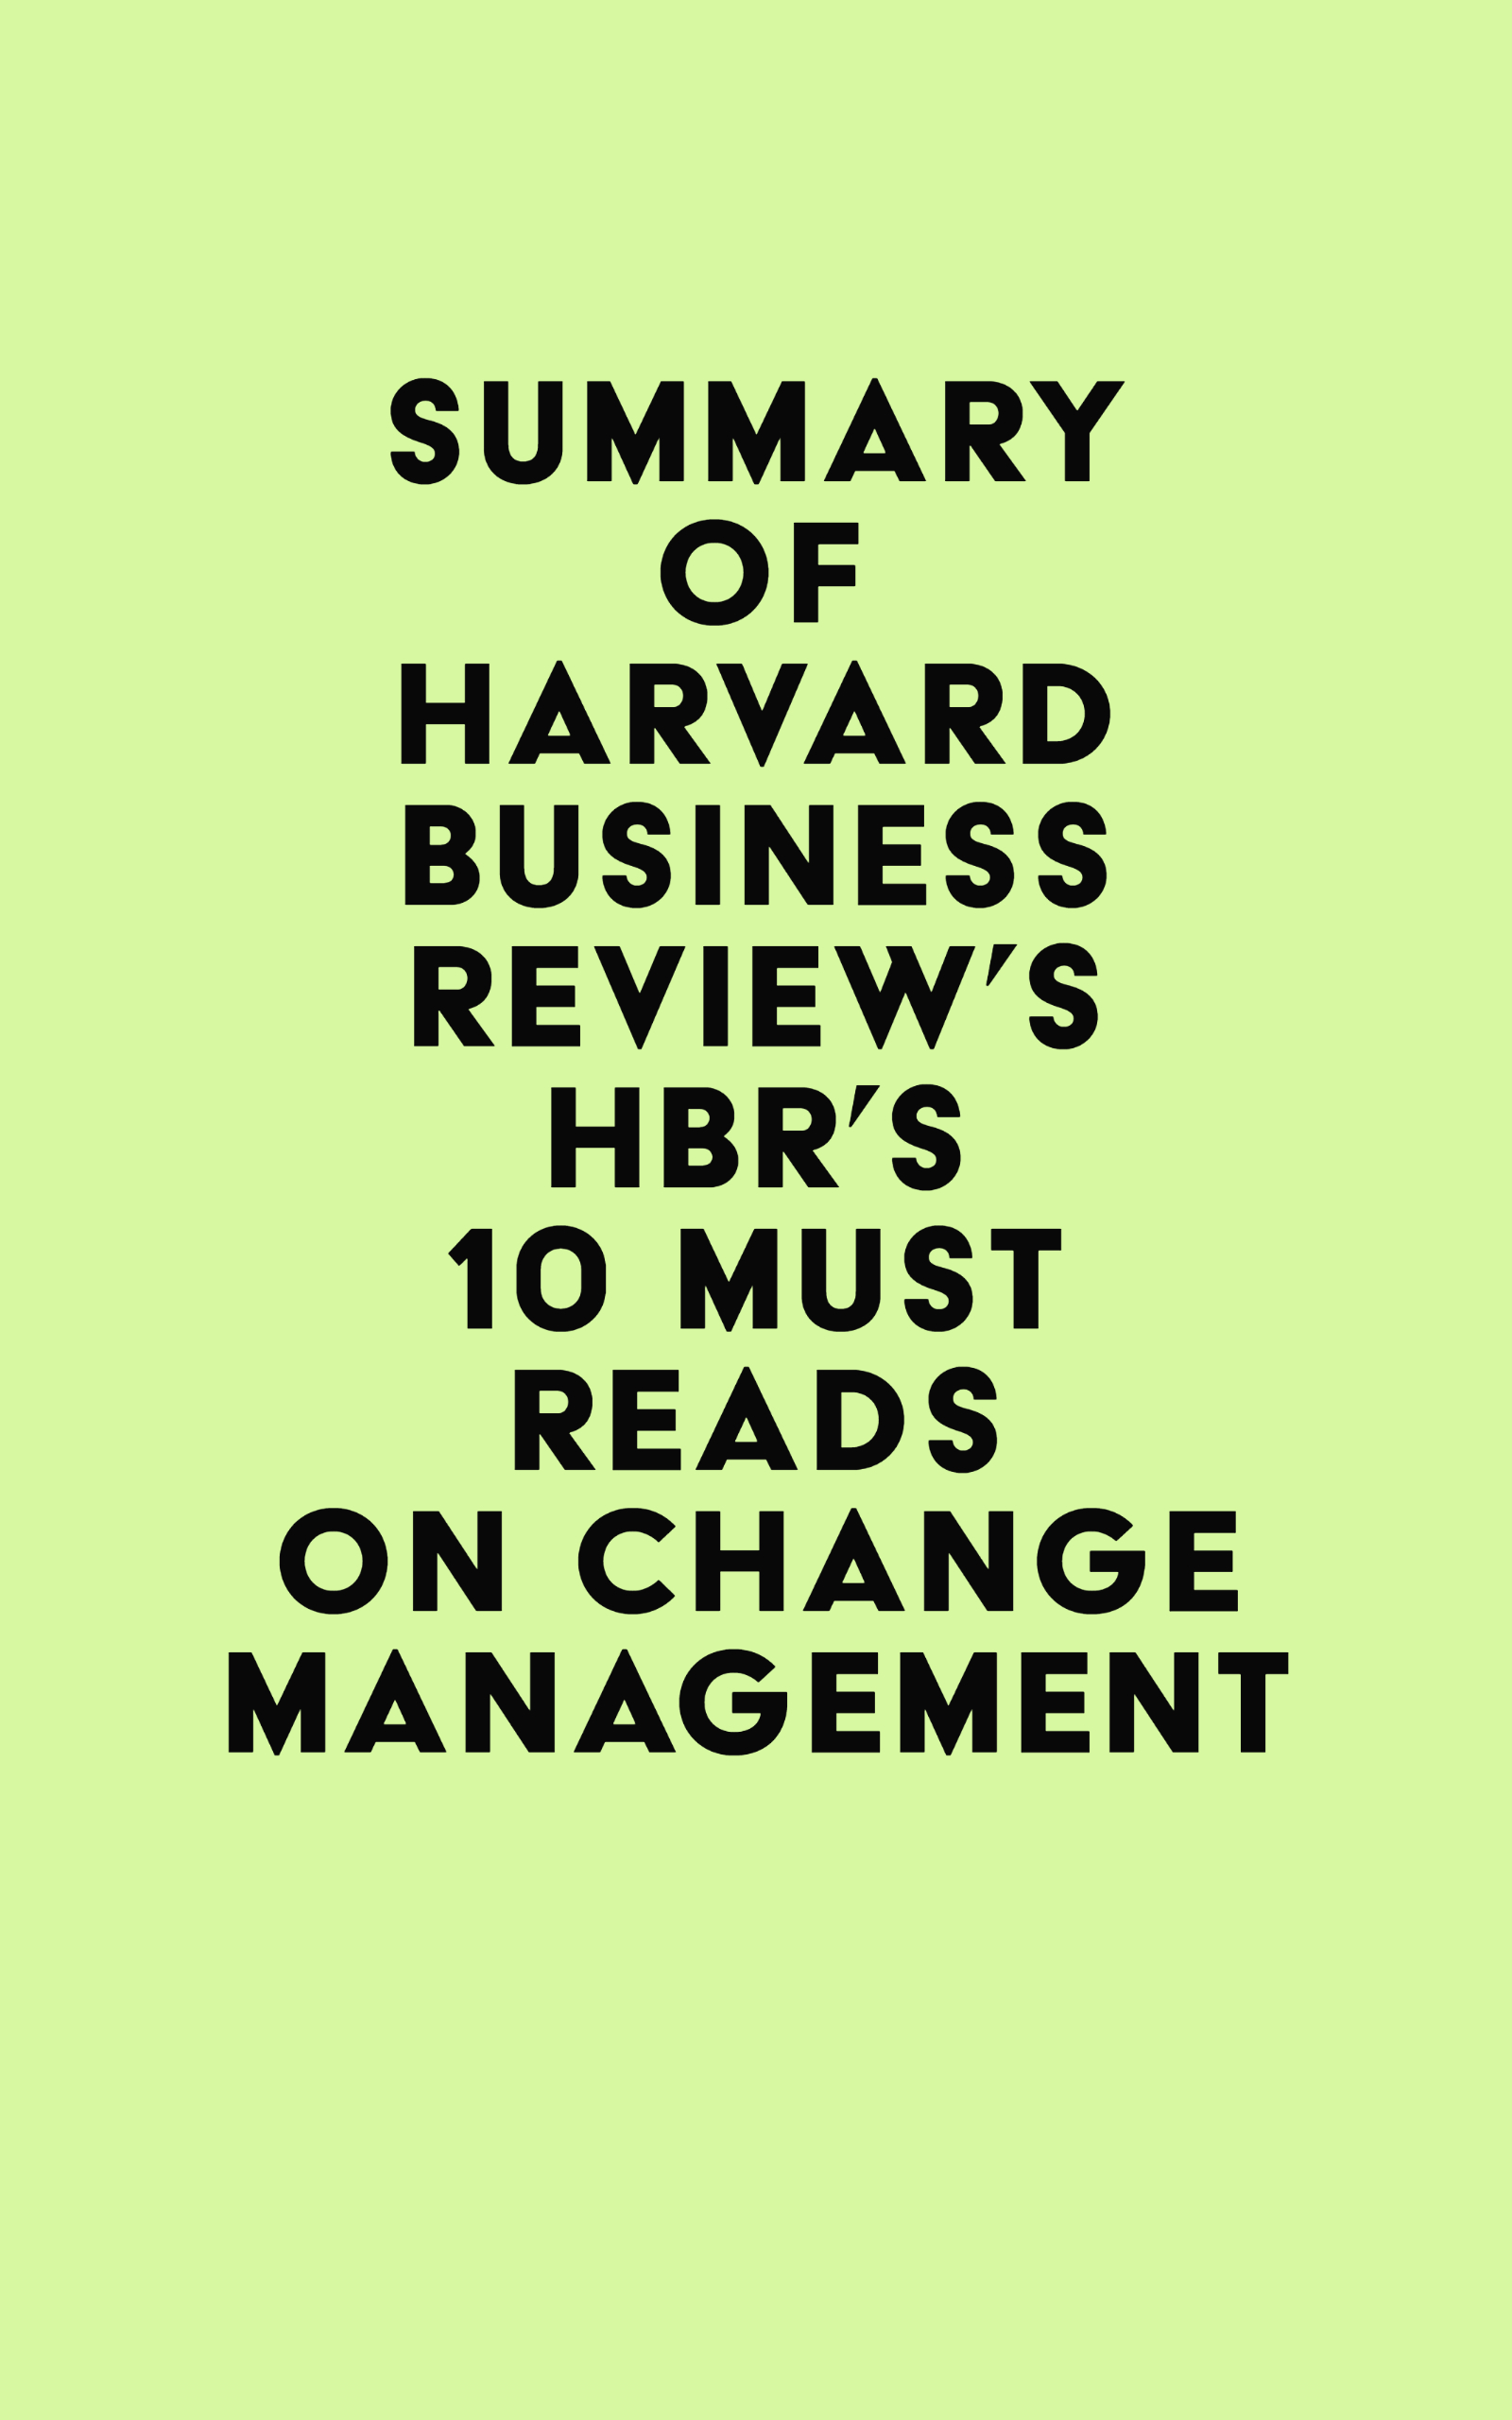 Summary of Harvard Business Review's HBR's 10 Must Reads on Change Management